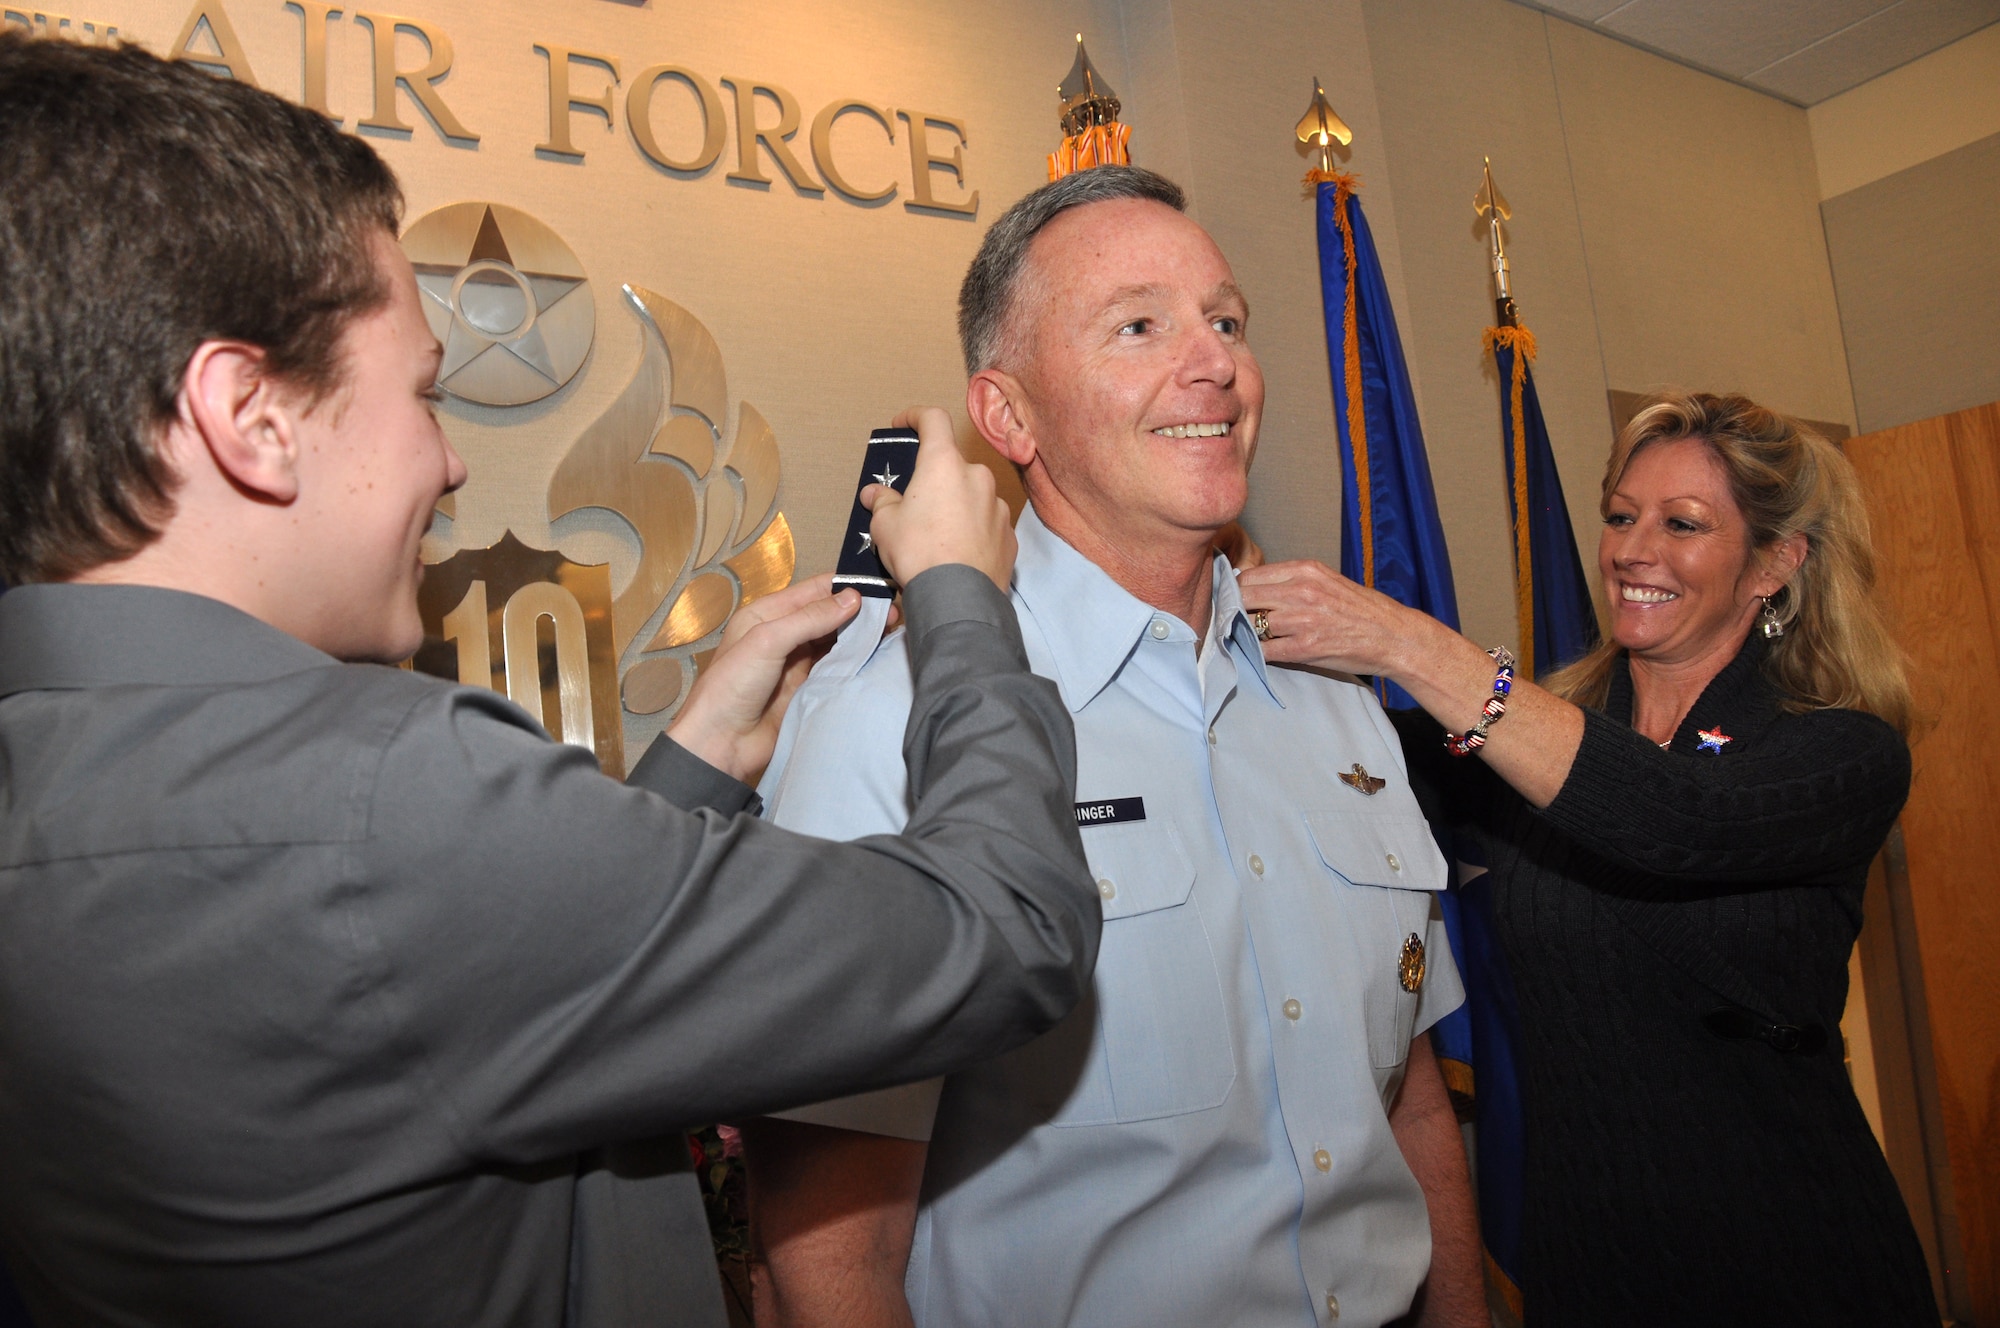 Tenth Air Force Commander Bill Binger pinned on his second star during a small ceremony at the Naval Air Station Fort Worth Joint Reserve Base, Texas, Feb. 2. Changing his shoulder boards were his son, to his left, and his wife, on his right. Maj. Gen Kevin Pottinger, Mobilization Assistant to the Vice Commander, Pacific Air Forces, Joint Base Pearl Harbor-Hickam, Hawaii. was the officiating officer. (U.S. Air Force photo/Master Sgt. Julie Briden-Garcia)